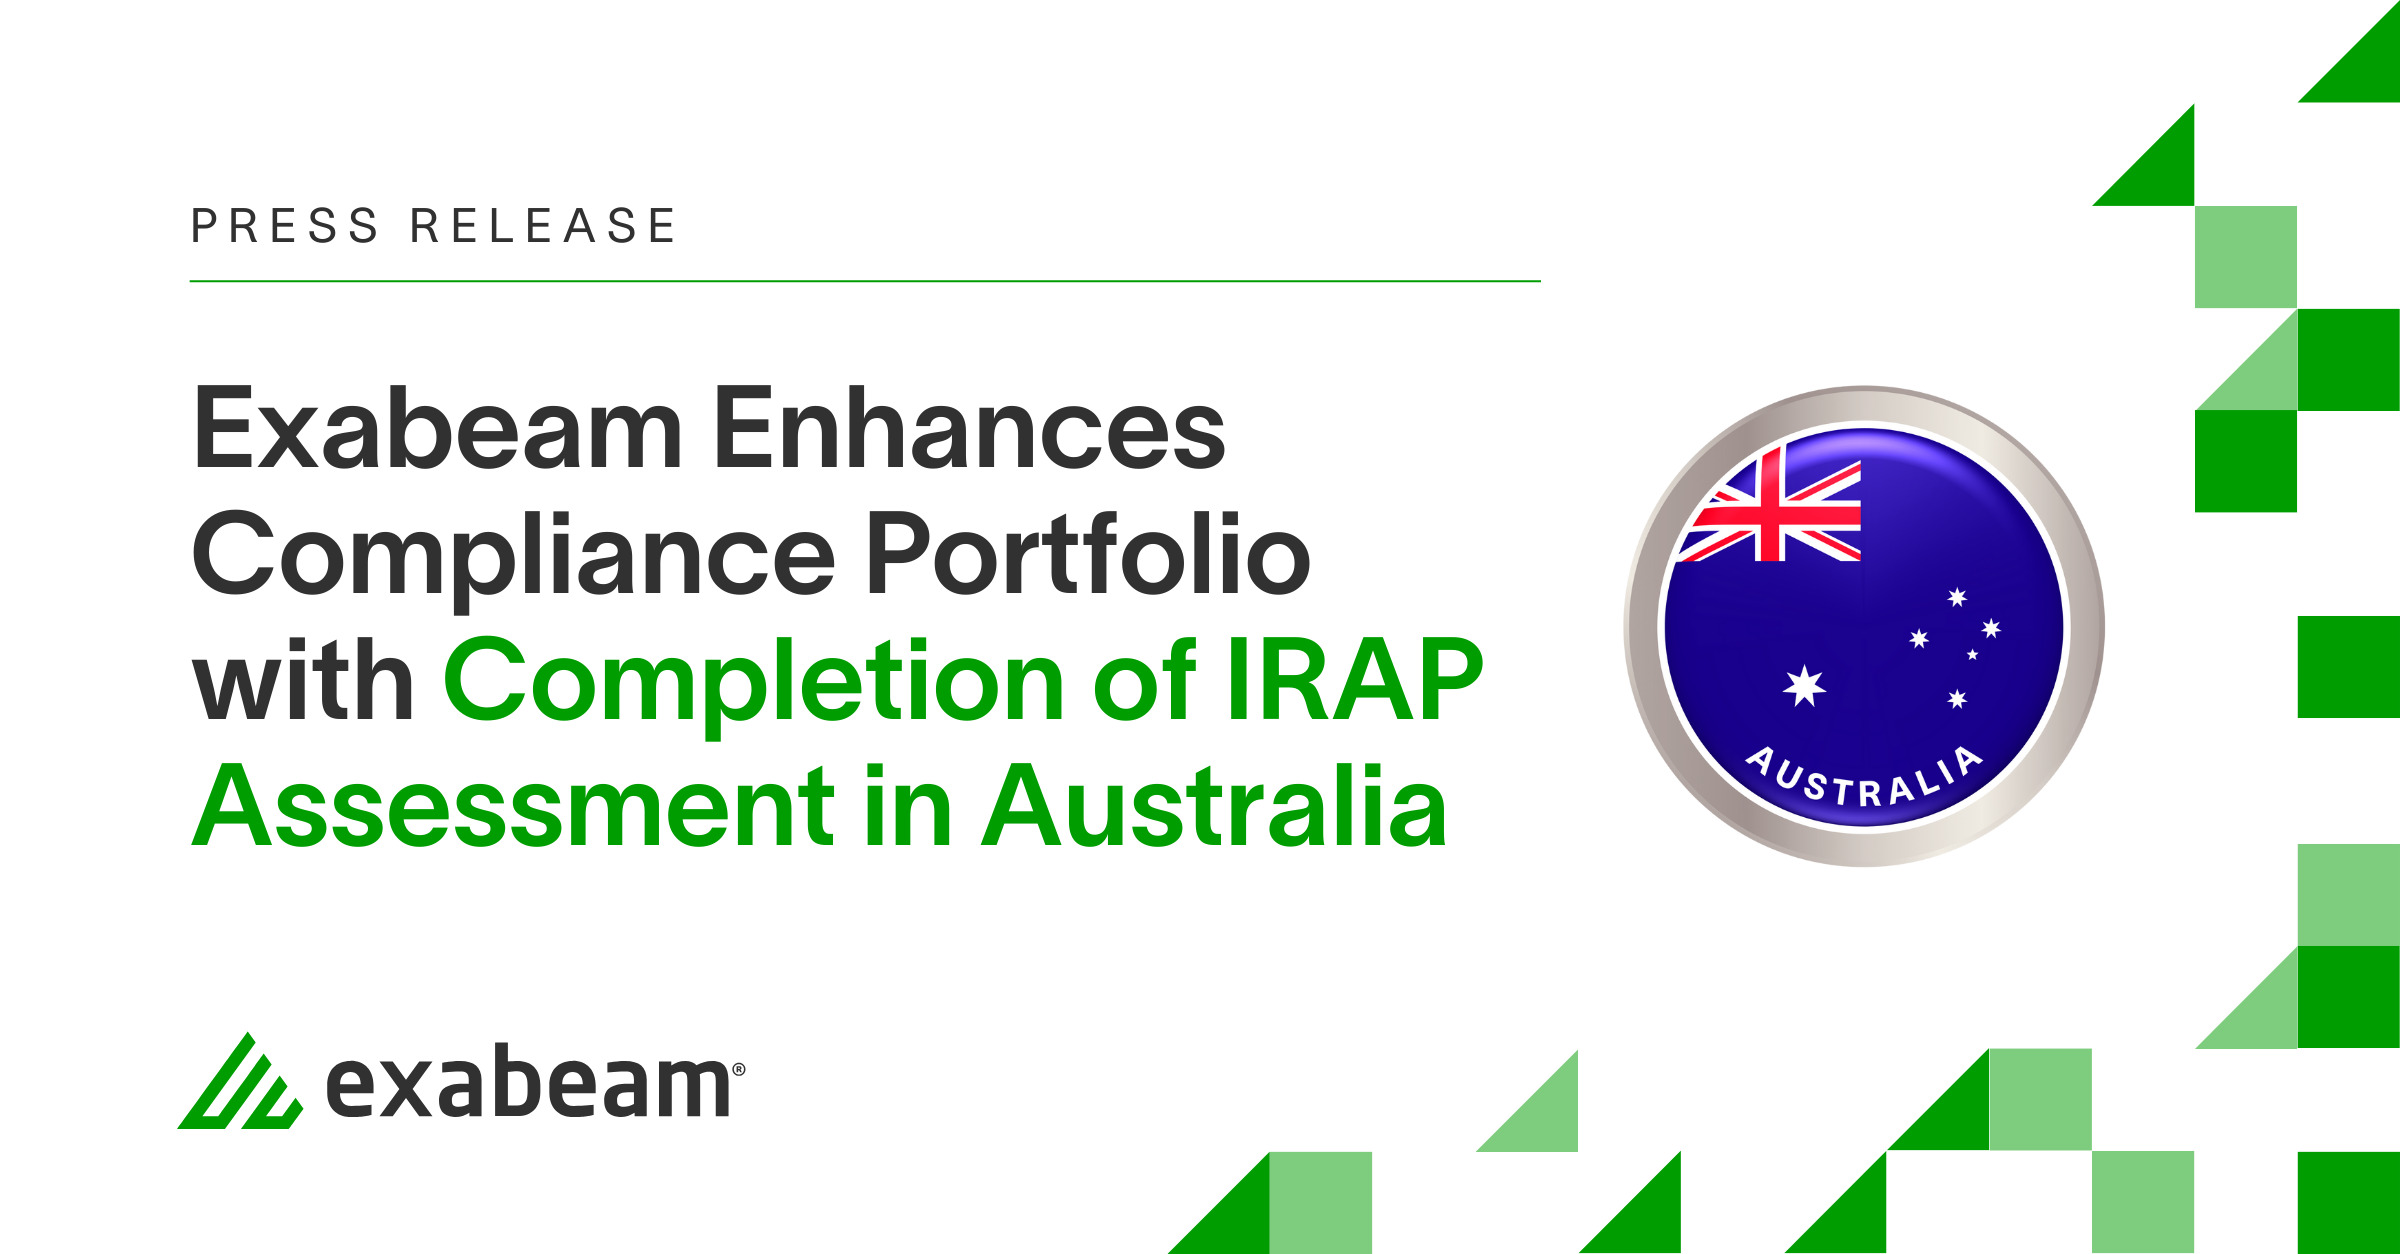 Exabeam Enhances Compliance Portfolio with Completion of IRAP Assessment in Australia